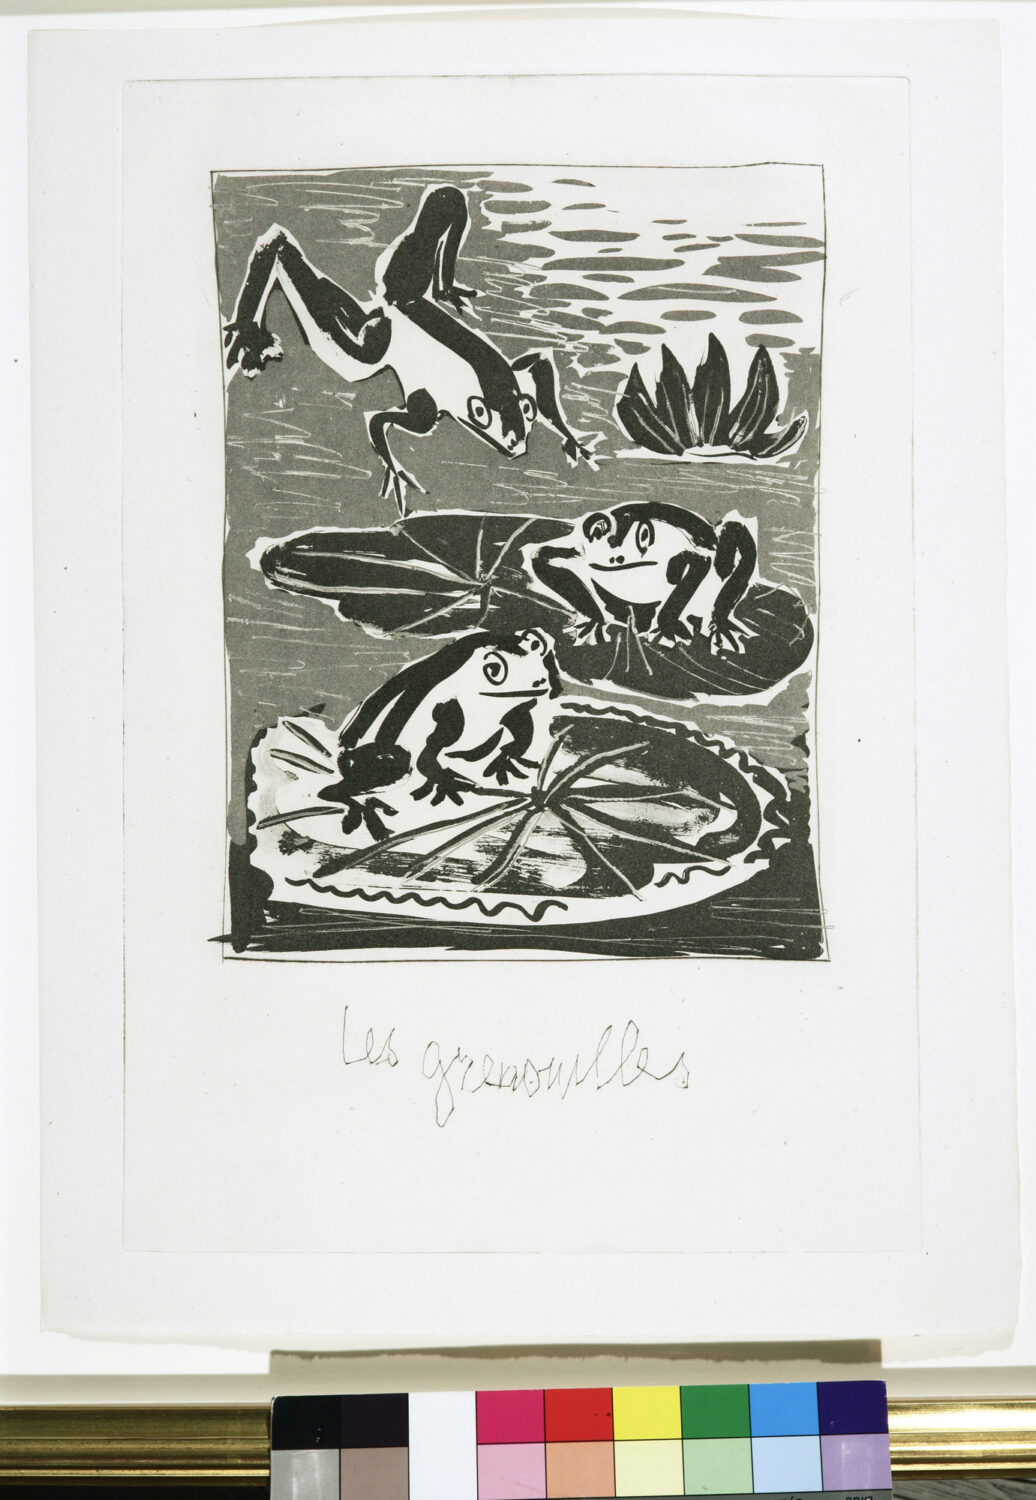 thumbnail of Aquatint and drypoint by Pablo Picasso titled Les Grenouilles.